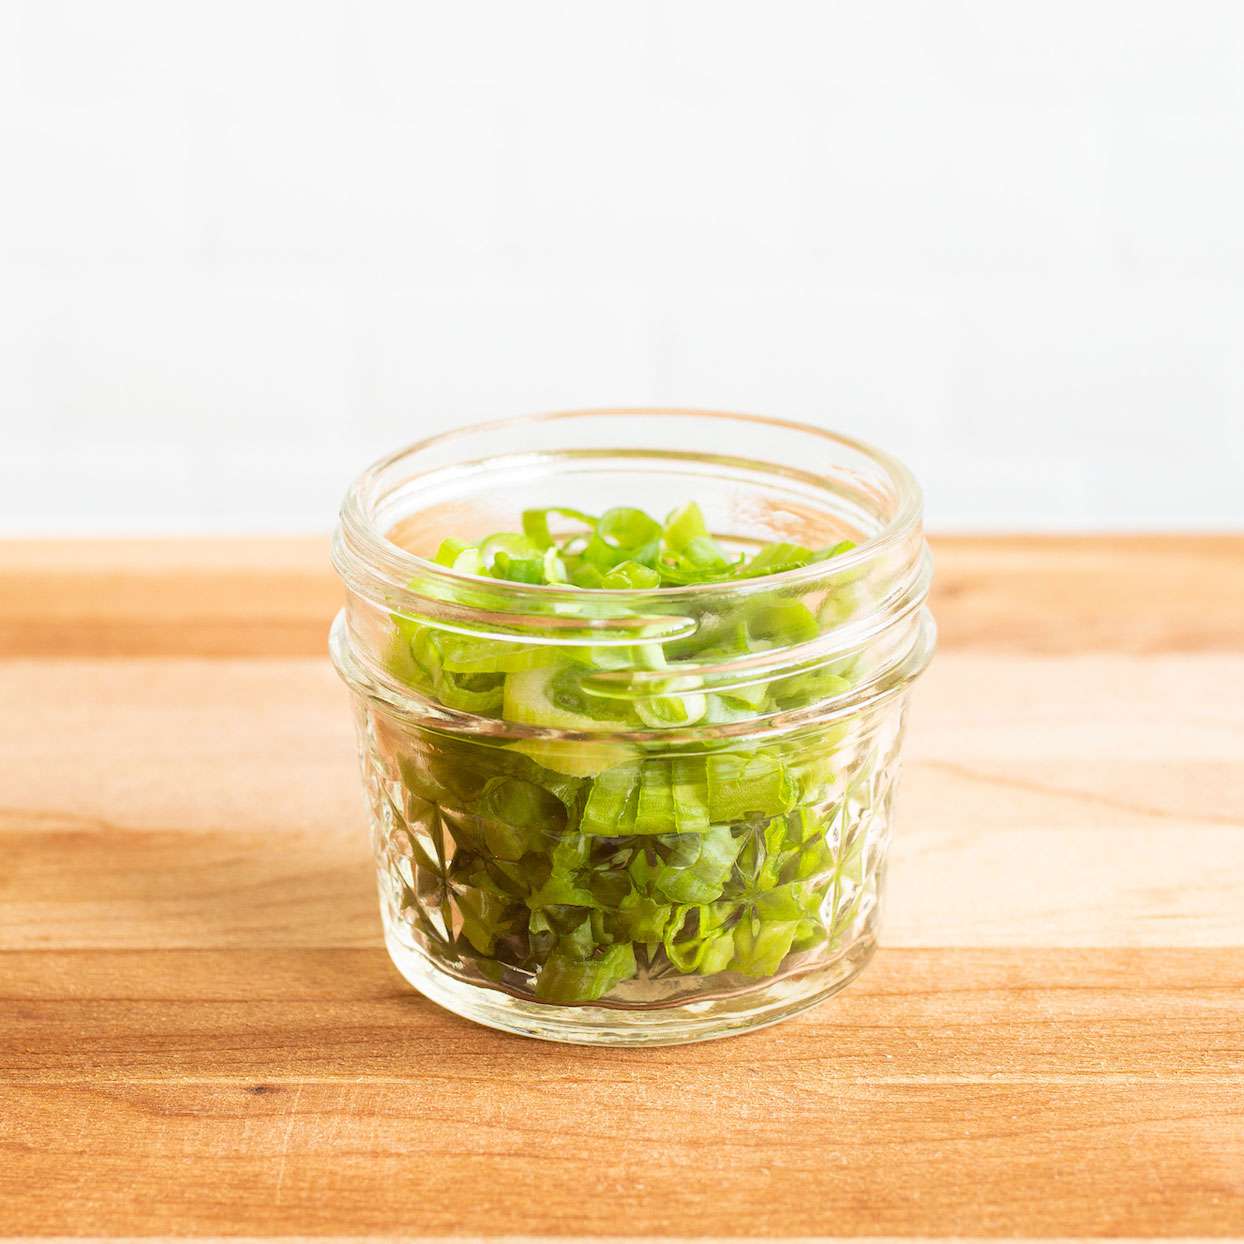 Sliced green onion rounds in a small jar